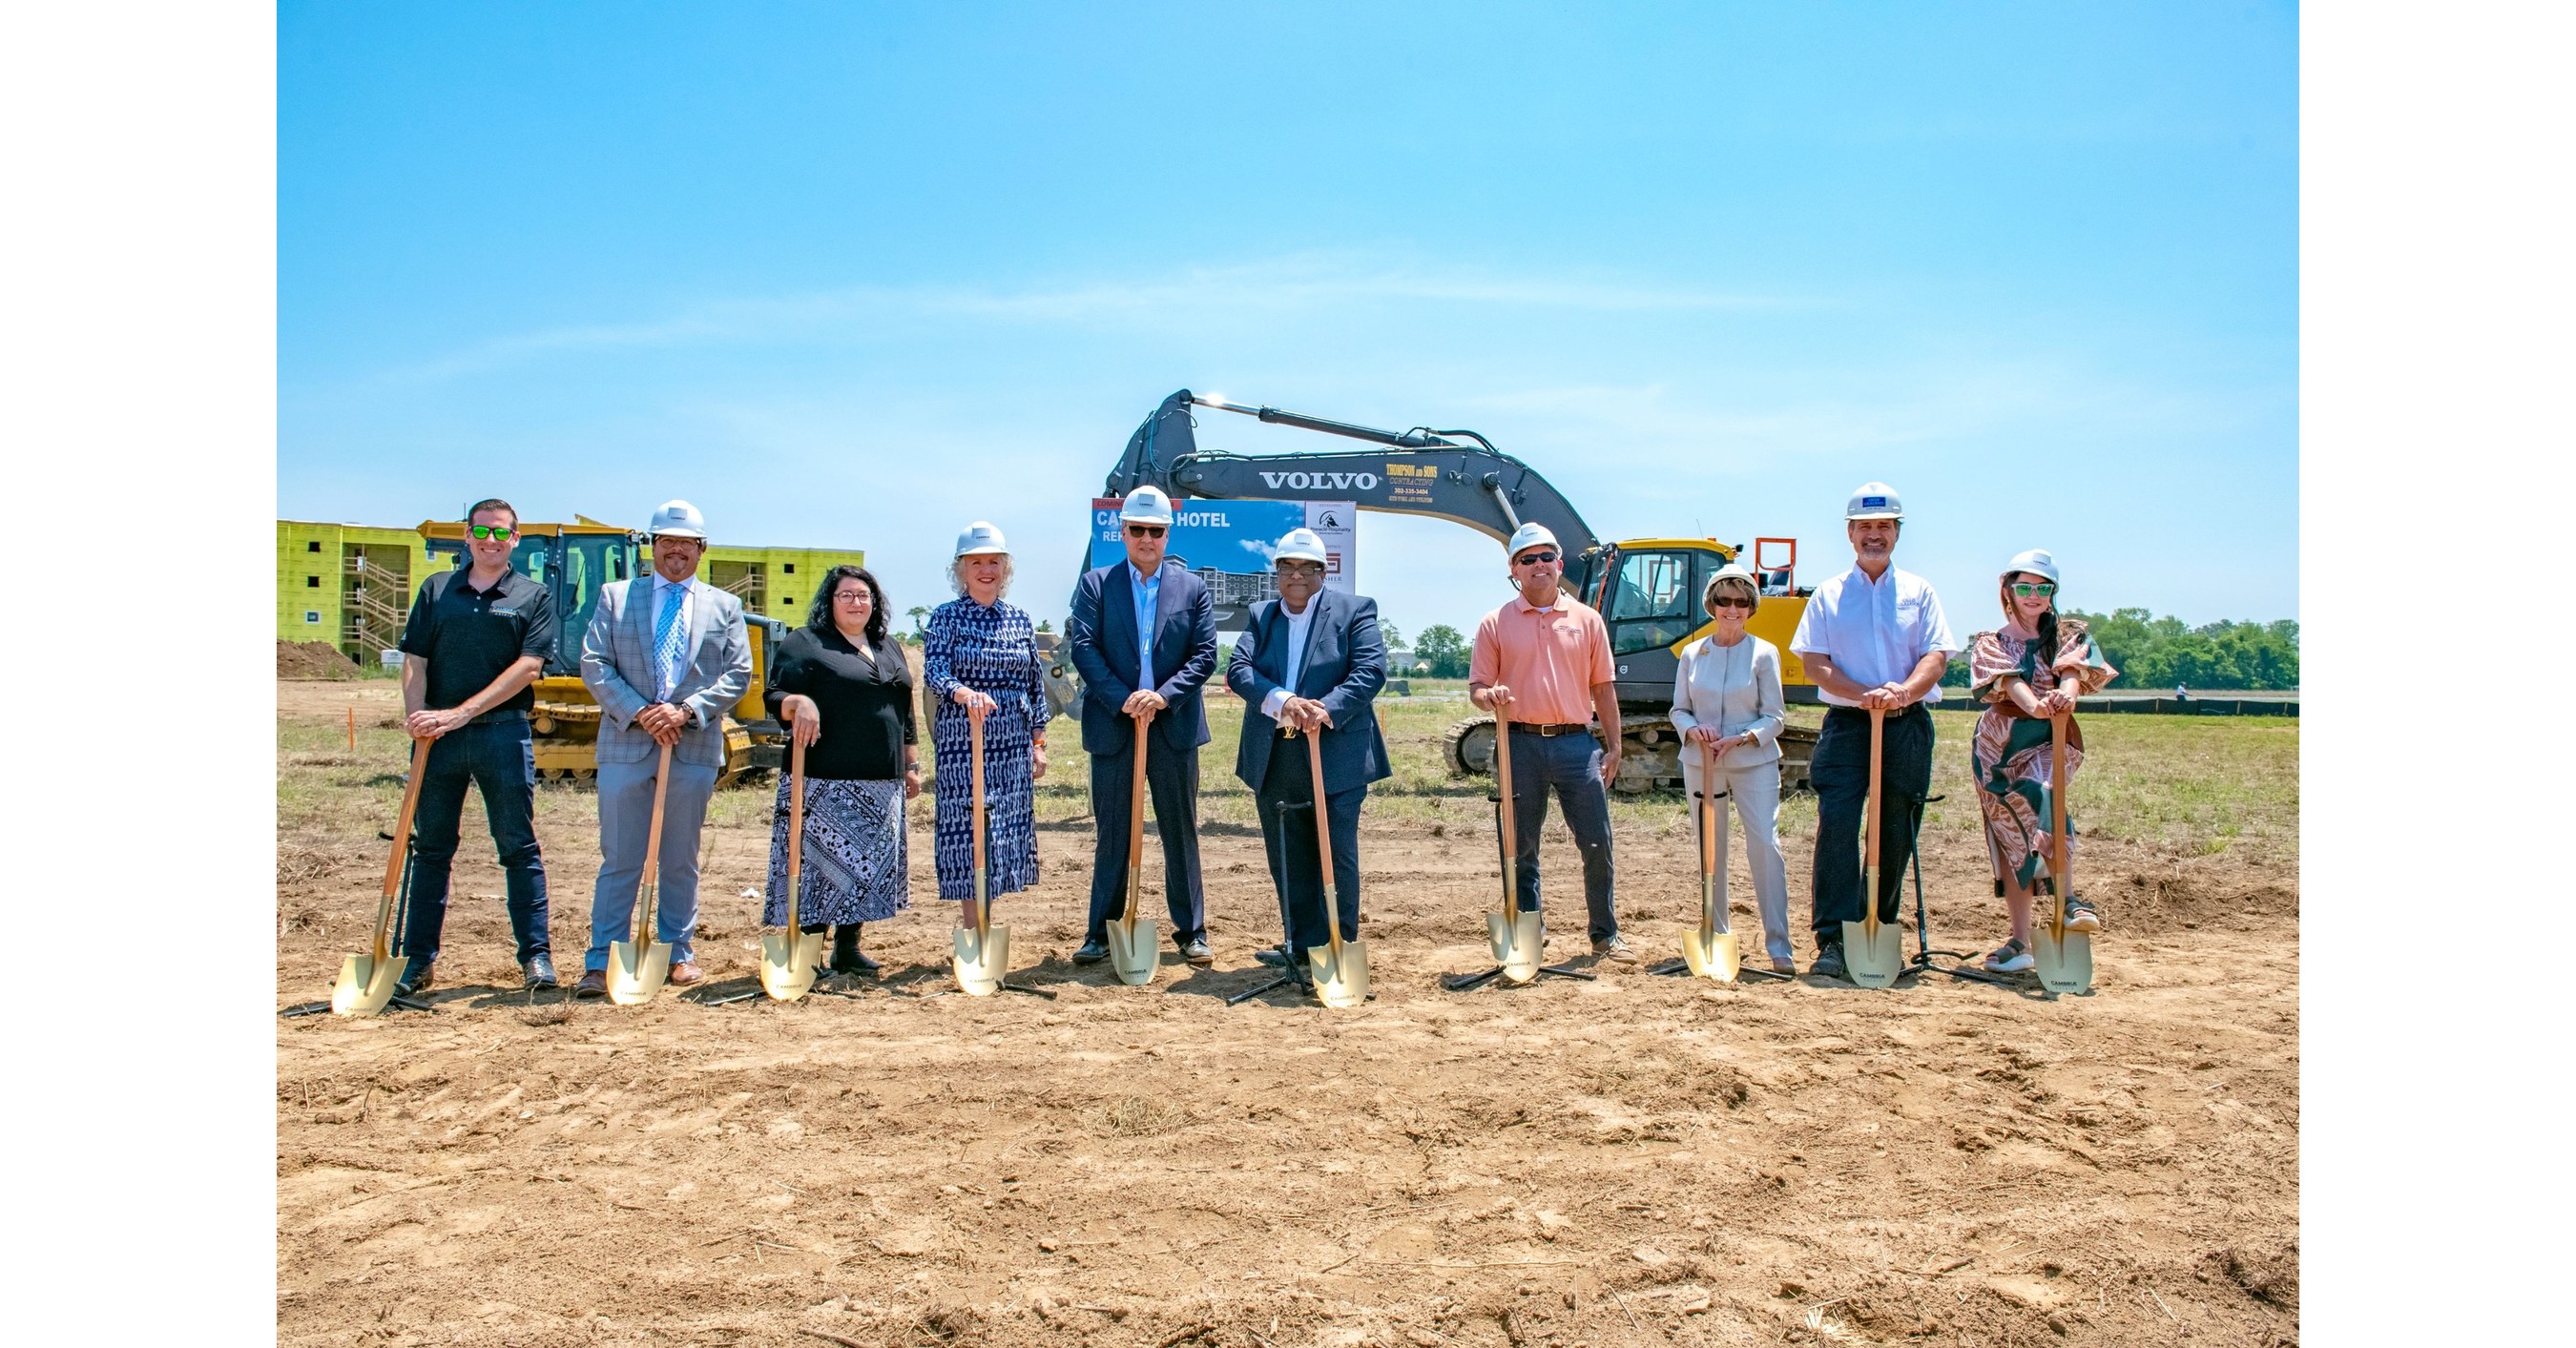 Cambria Hotels Breaks Ground On First Property In Delaware